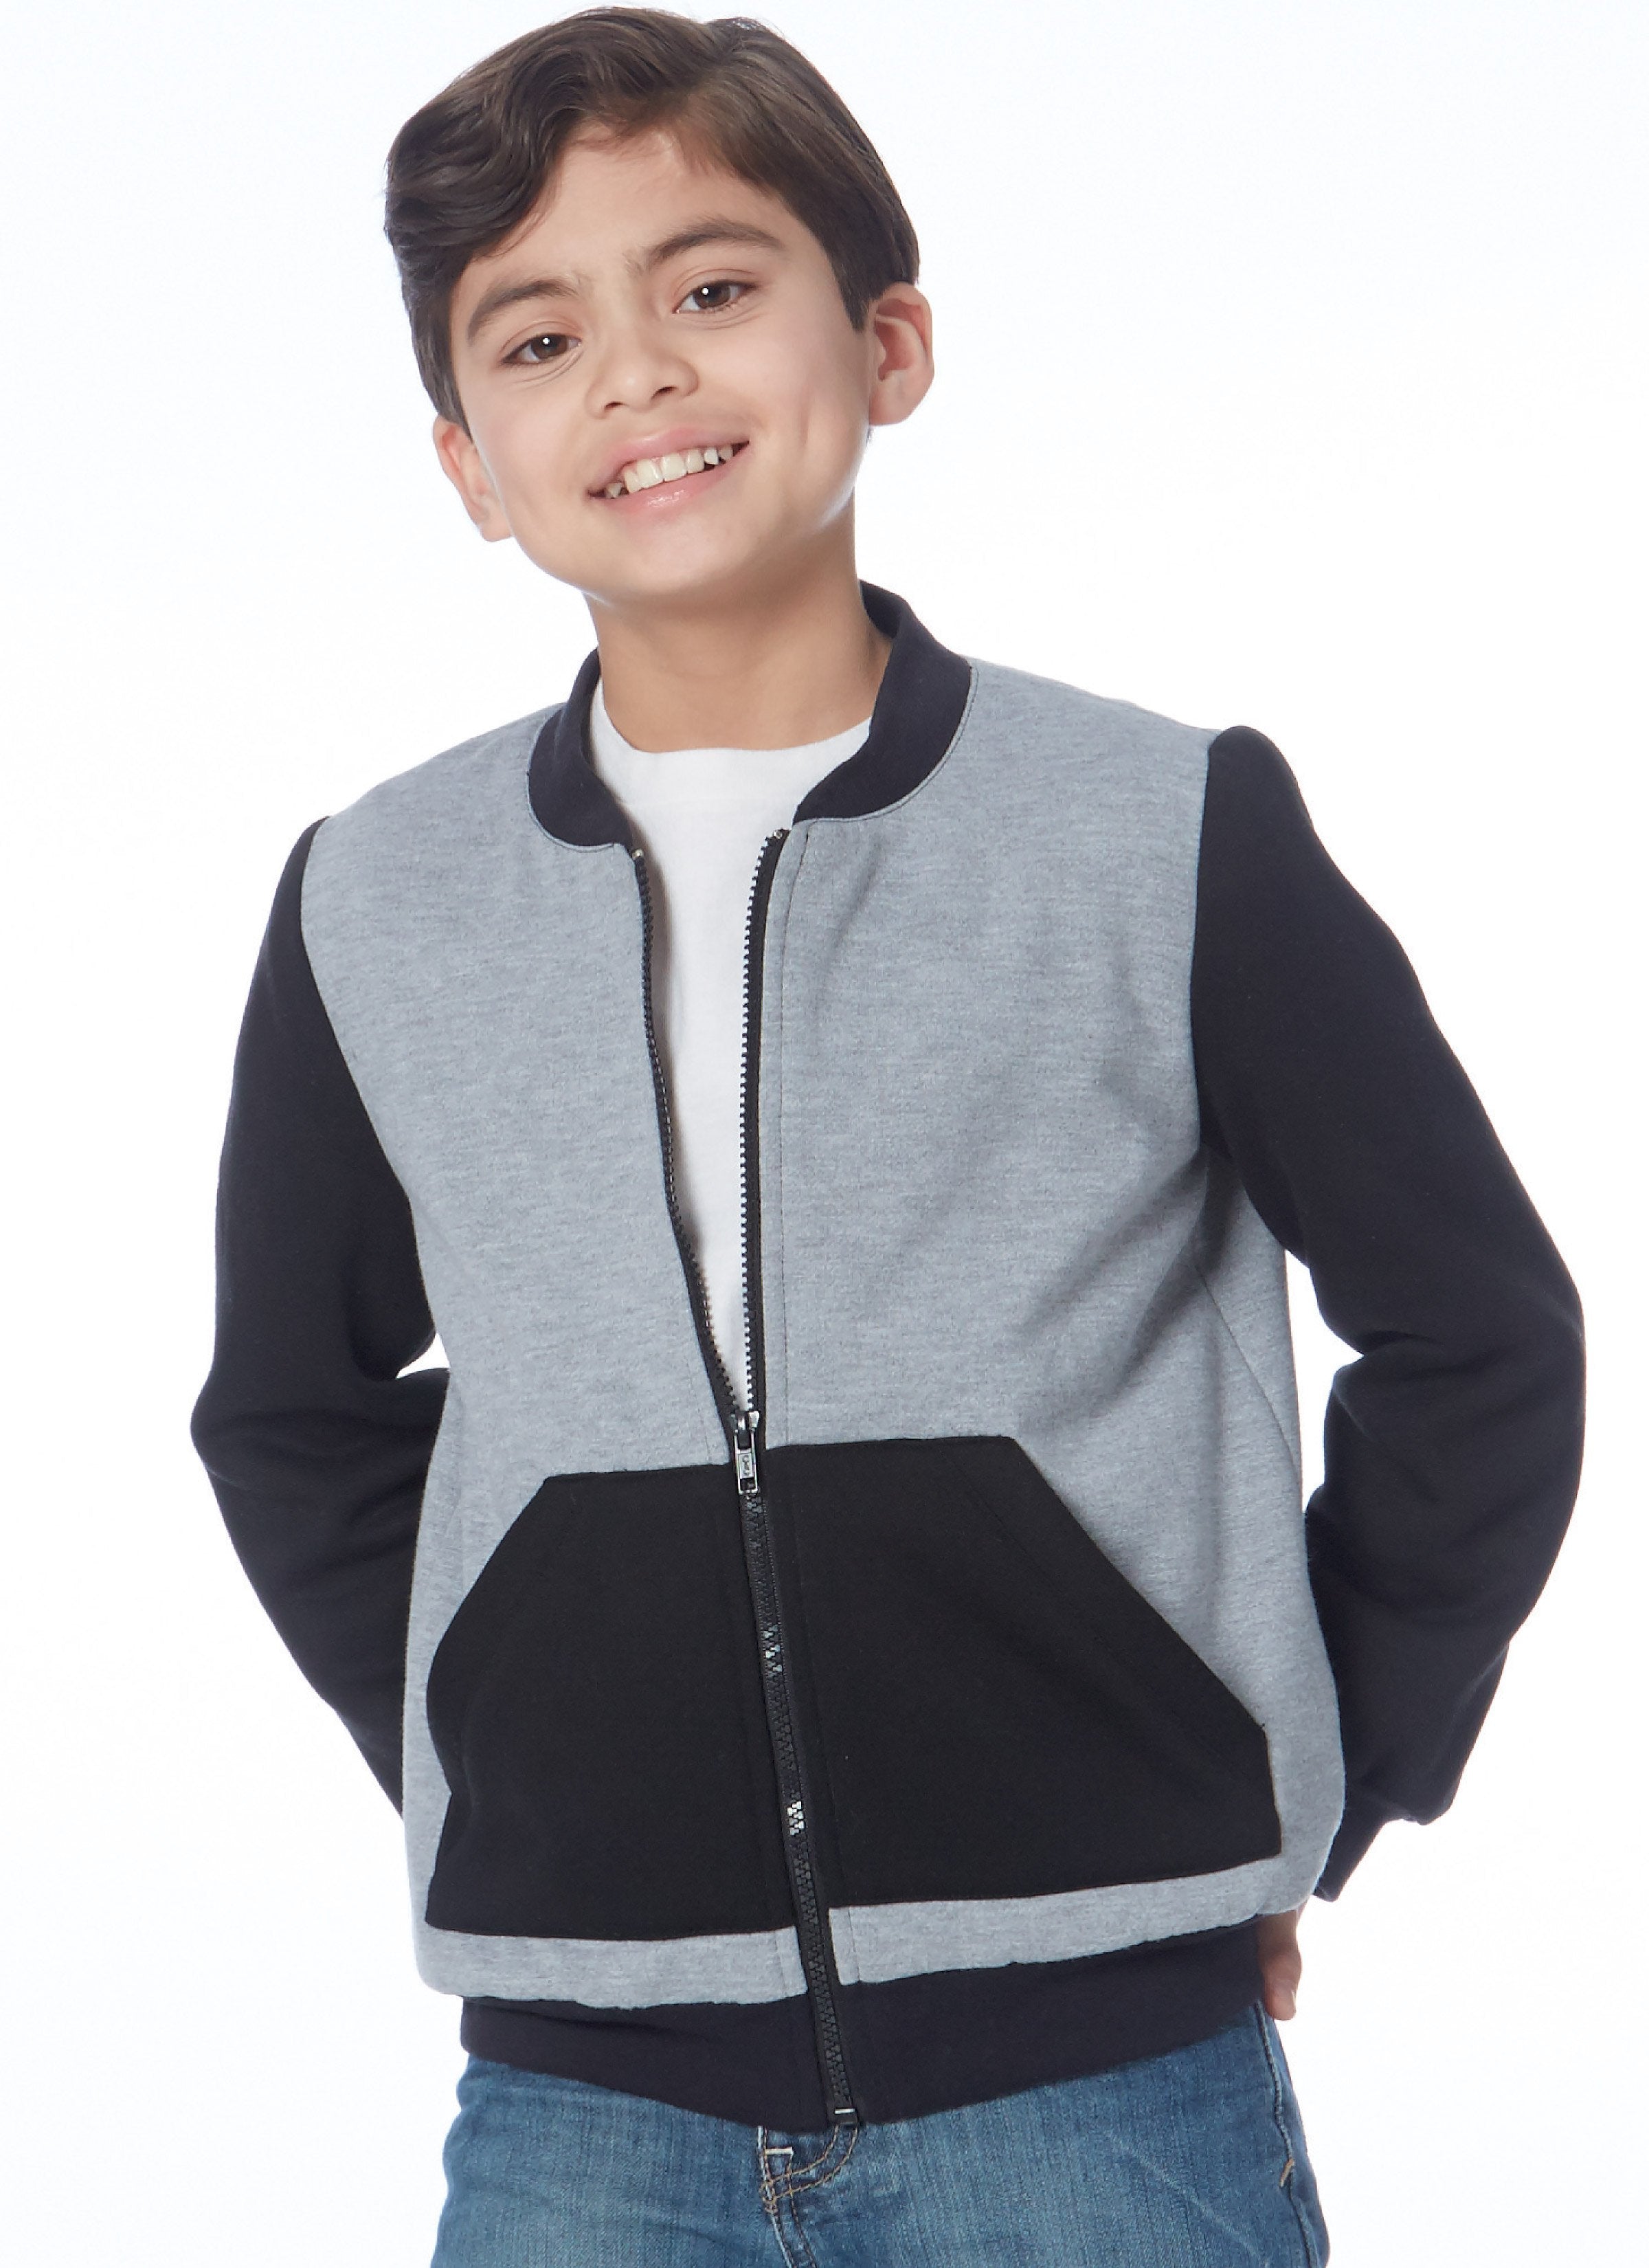 M7619 Girls' / Boys' Bomber Jackets from Jaycotts Sewing Supplies